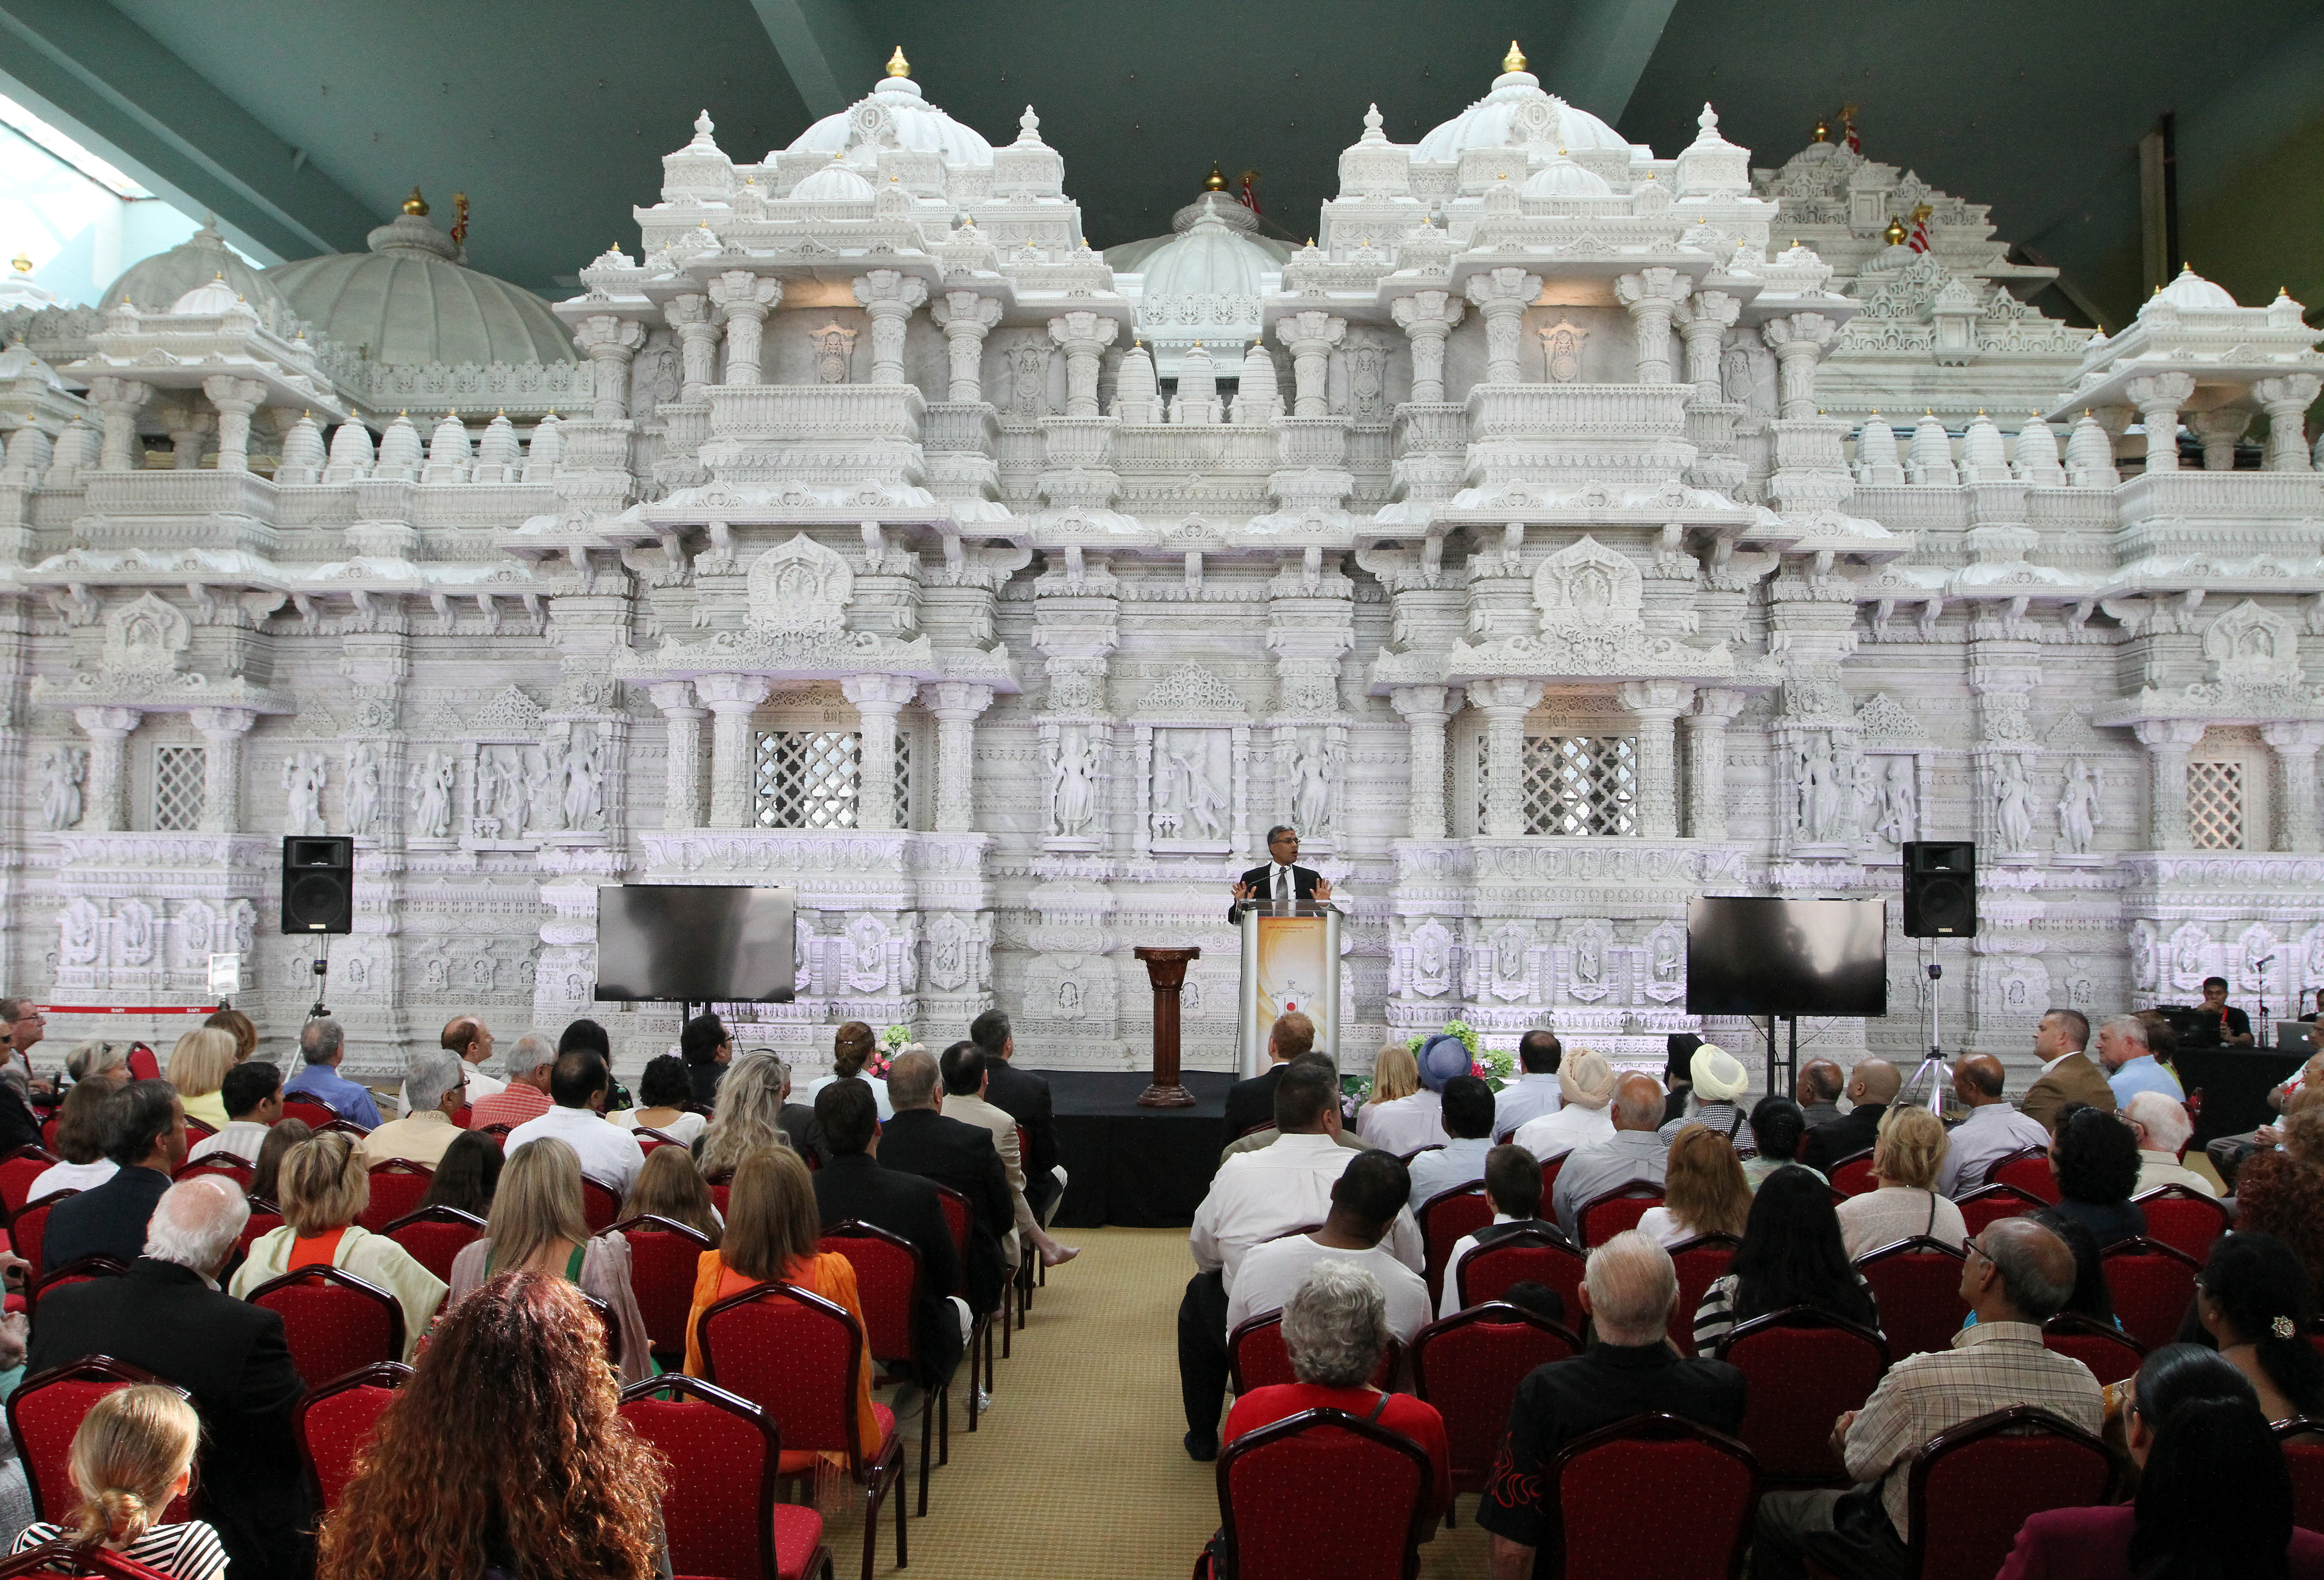 Kanu Patel, chief executive officer, speaks to during a ceremony dedicating the new BAPS Shri Swaminarayan Mandir temple, in Robbinsville, August 16, 2014.